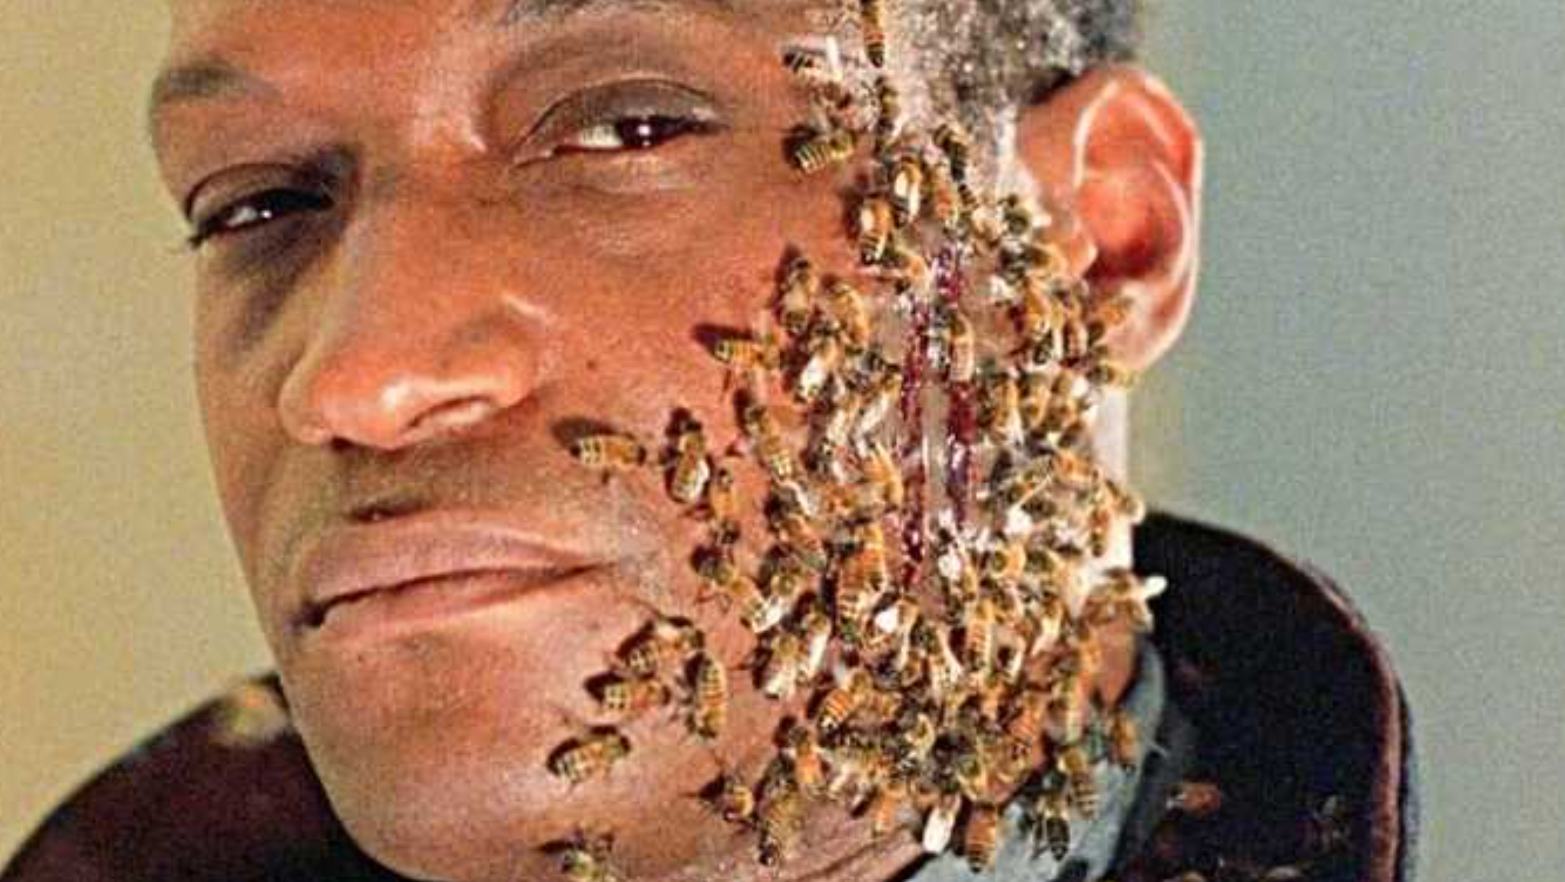 A man's face half way covered in bees - the Candyman